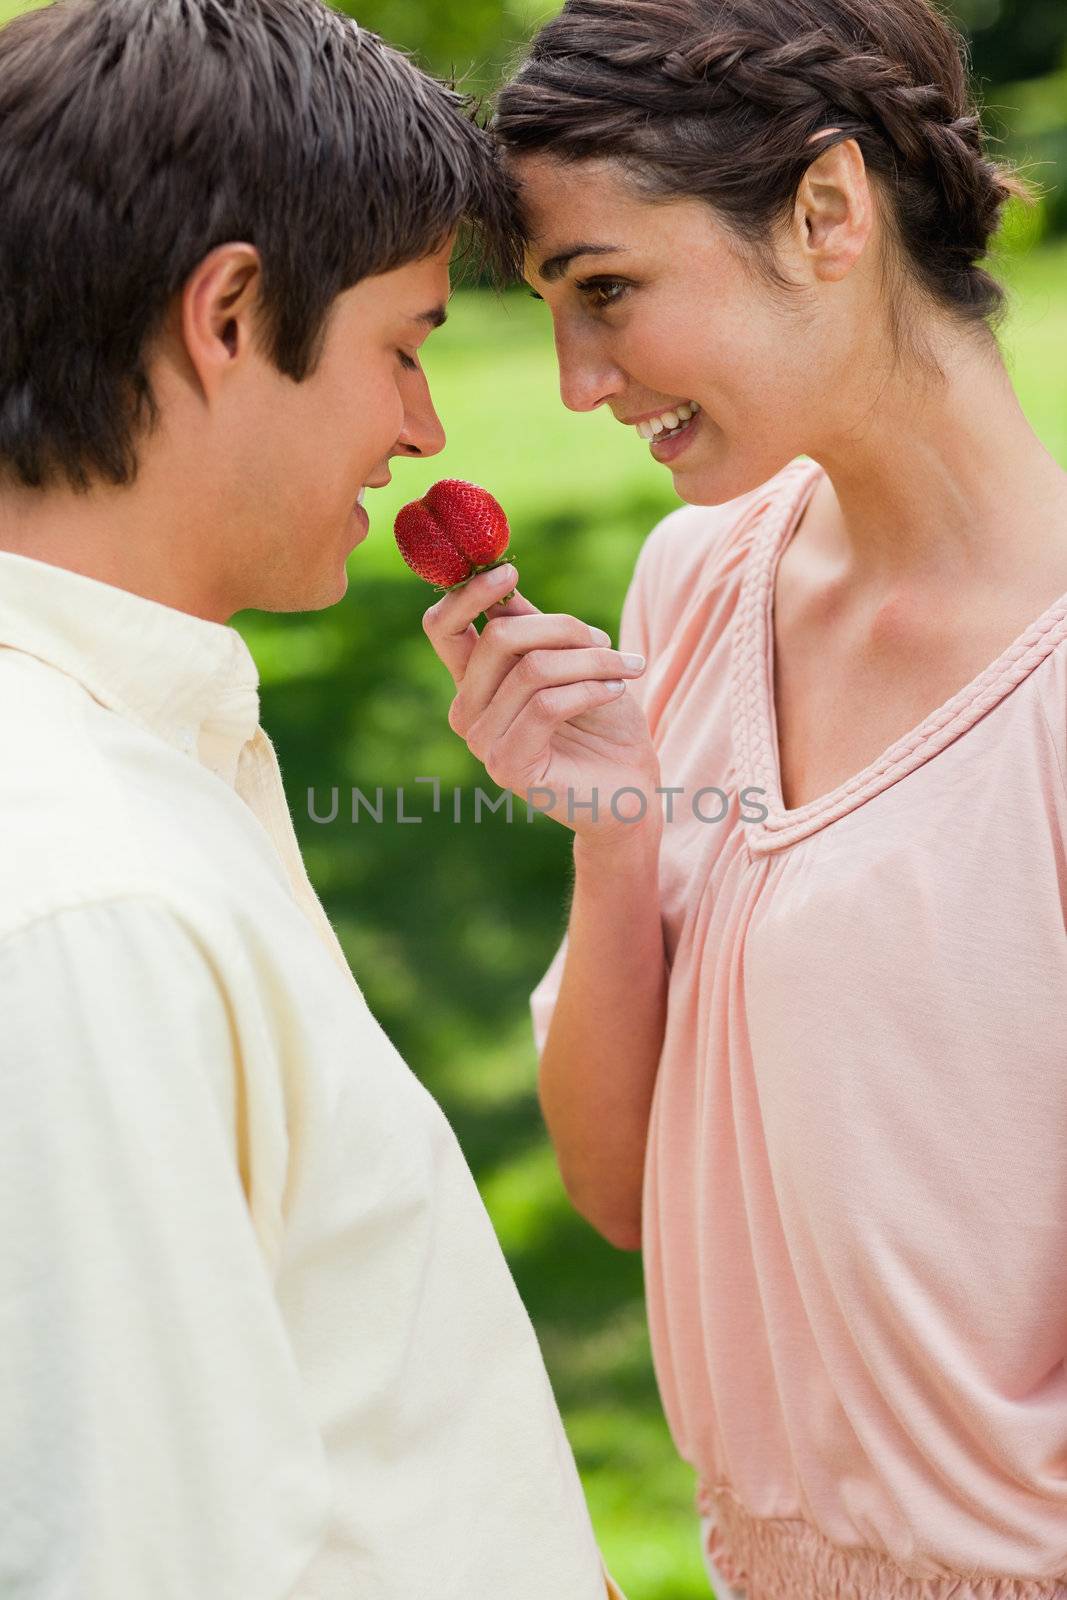 Man being offered a strawberry by his friend by Wavebreakmedia